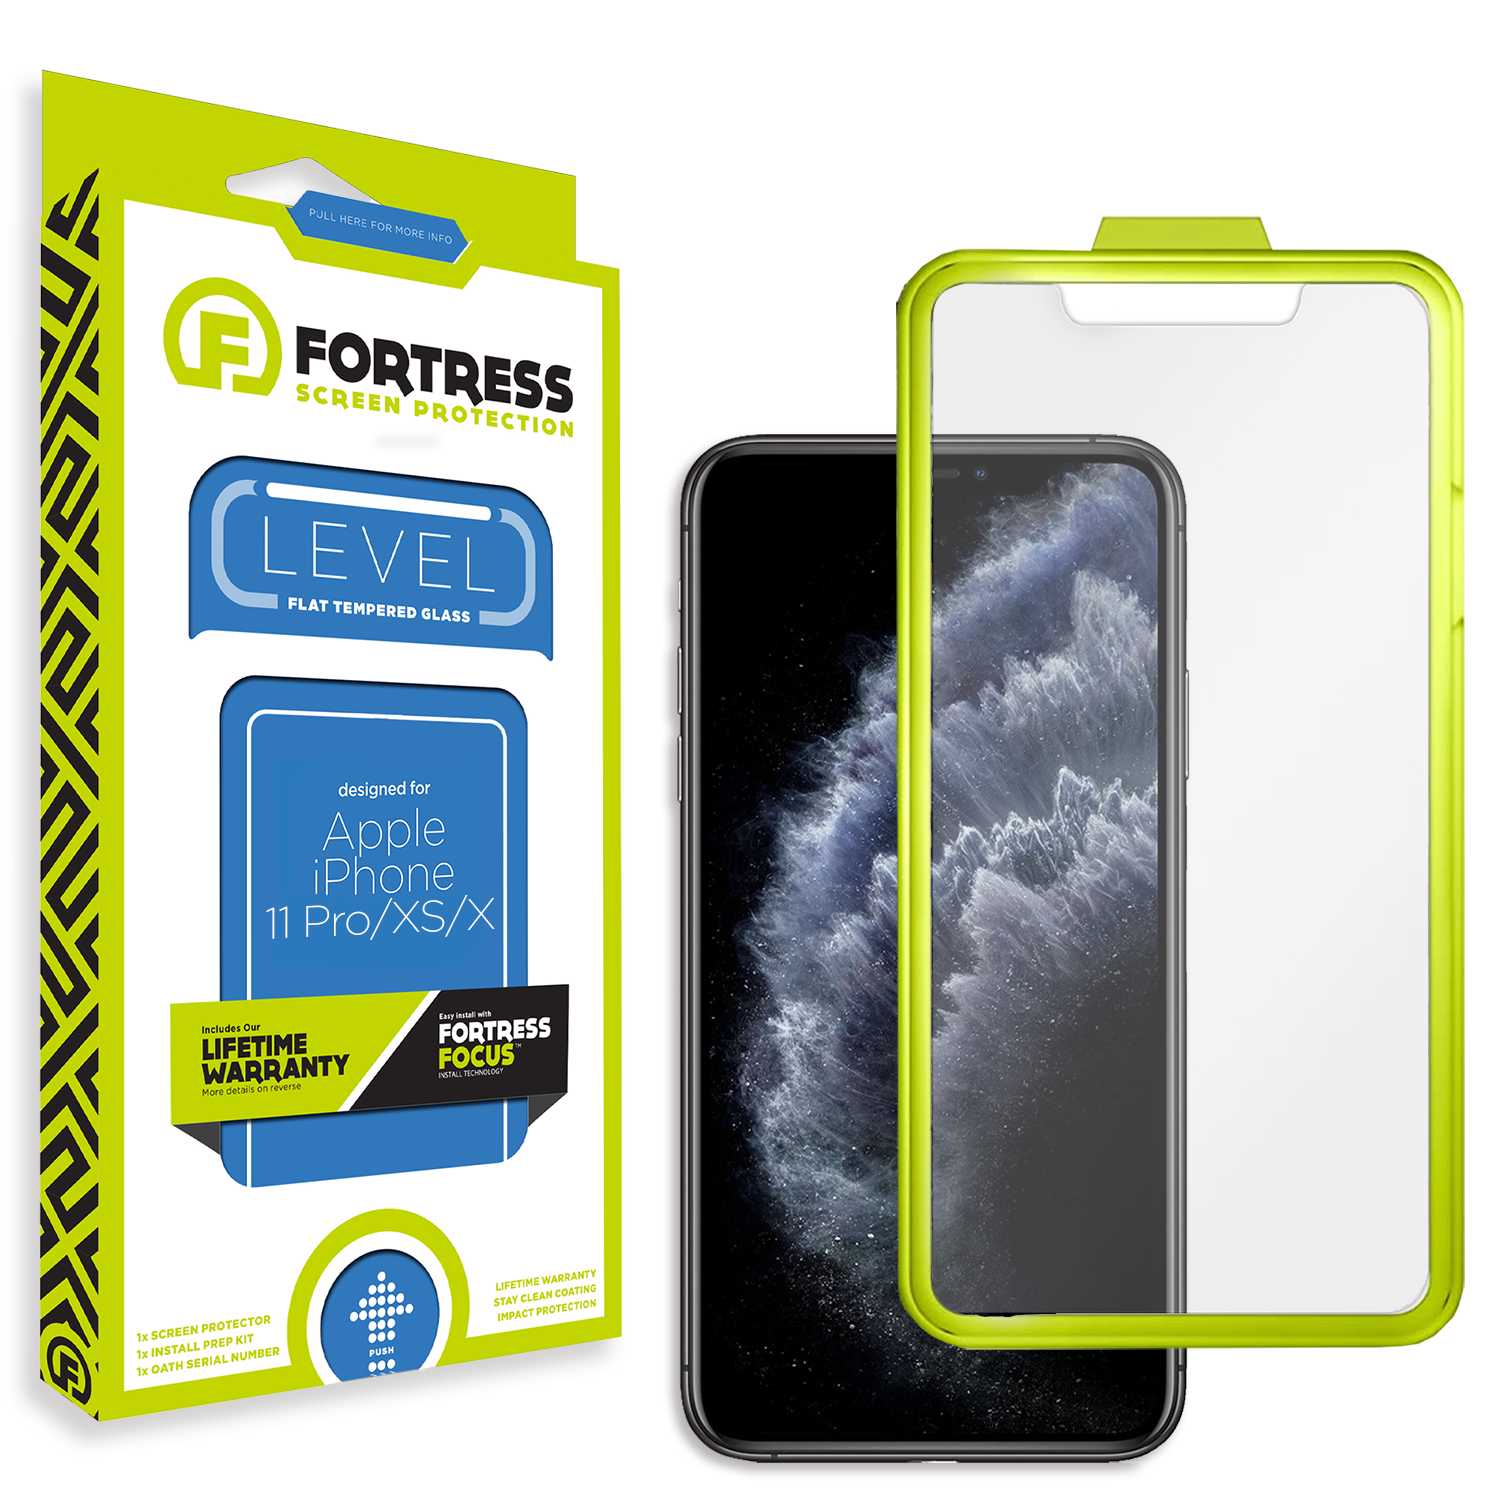 Fortress iPhone 11 Pro Screen Protector $0CoverageInstallTool Scooch Screen Protector